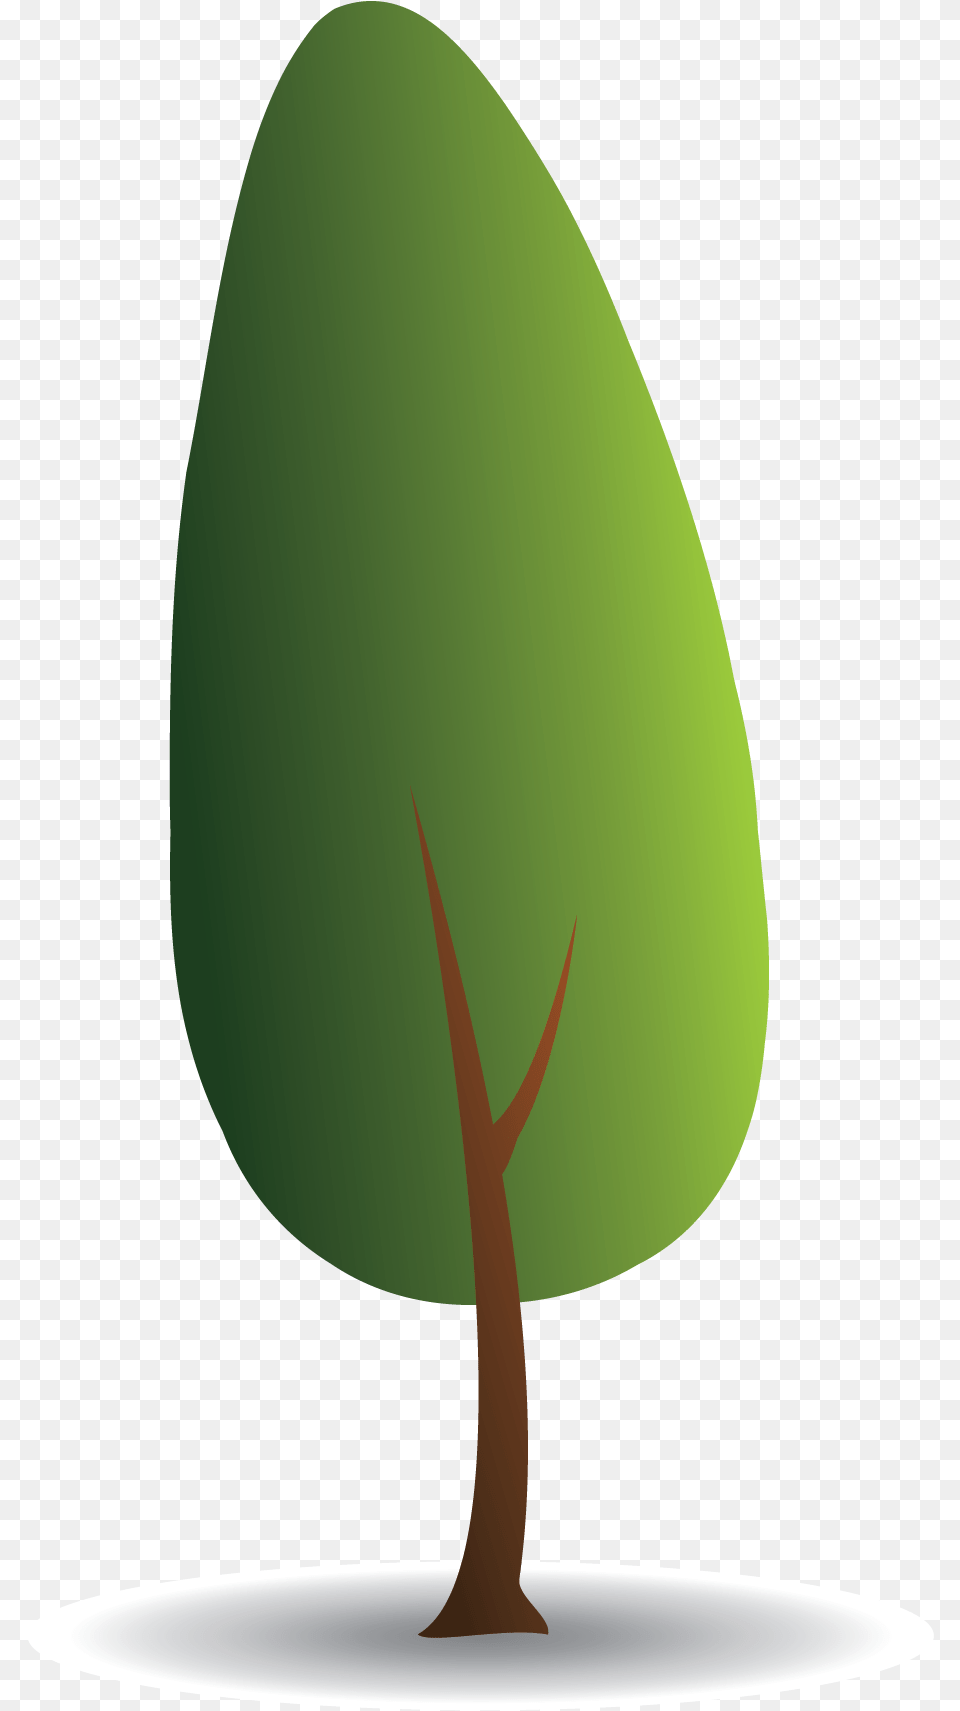 Free Tree Konfest Greenery, Sprout, Bud, Flower, Green Png Image